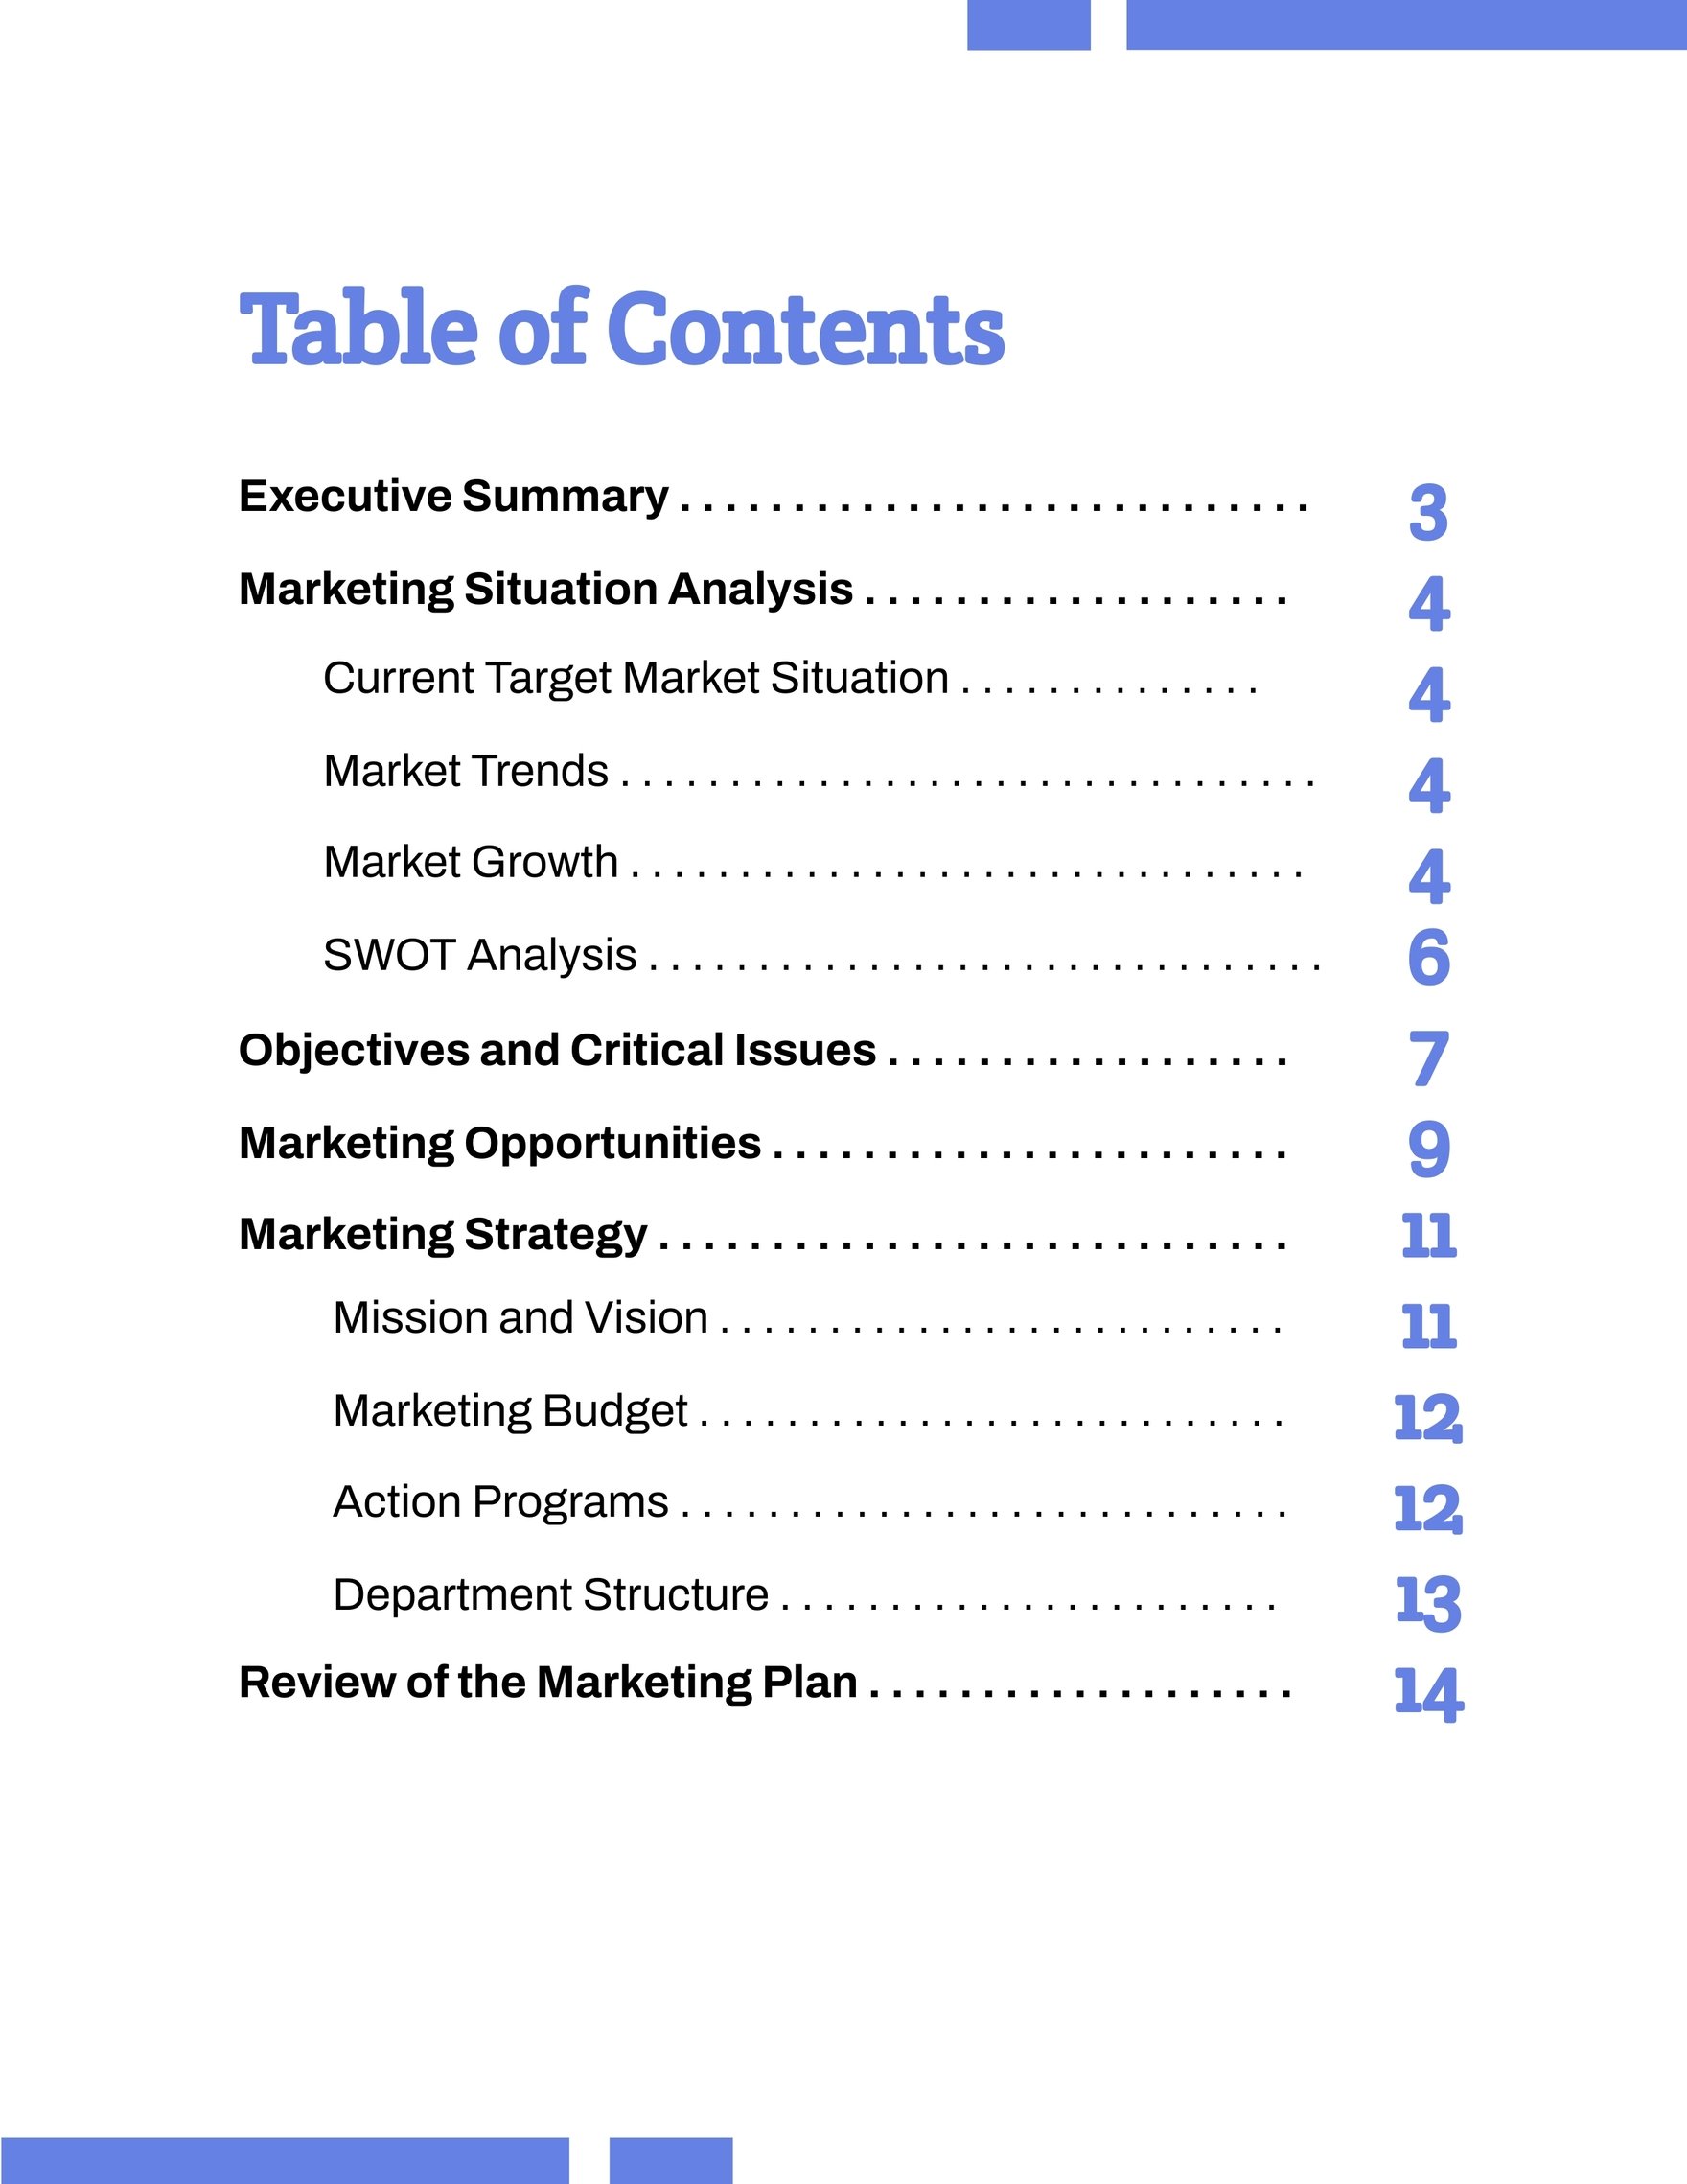 marketing-plan-table-of-contents